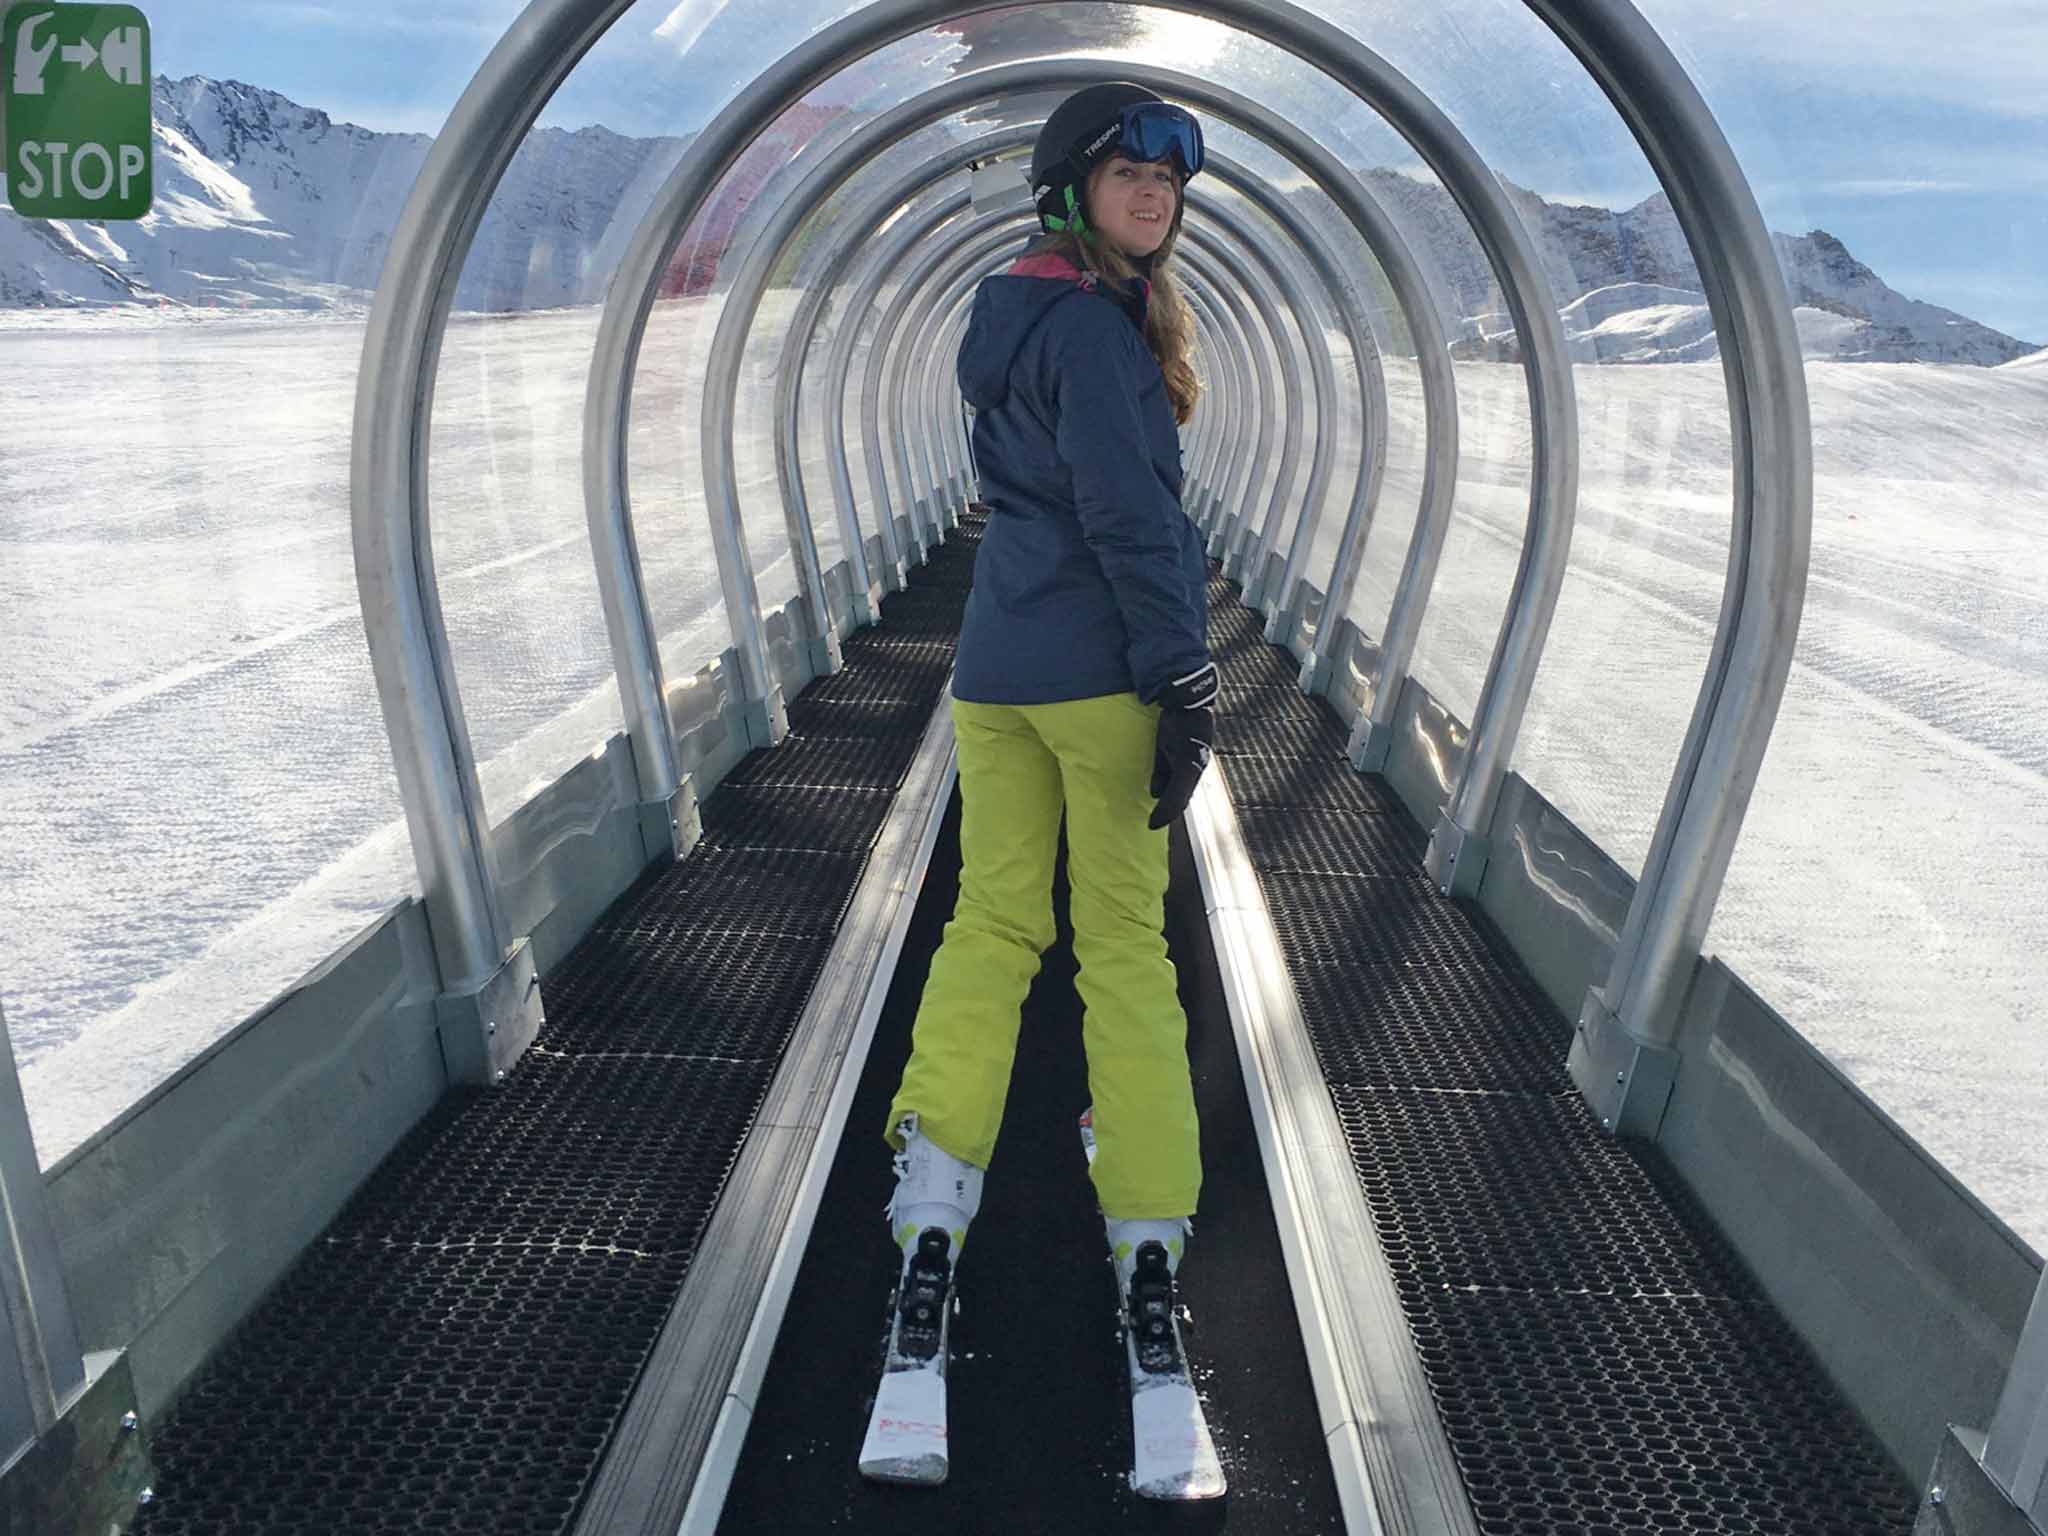 Tunnel vision: the new travelator has made Val d’Isère hassle-free for new skiers like Rachael